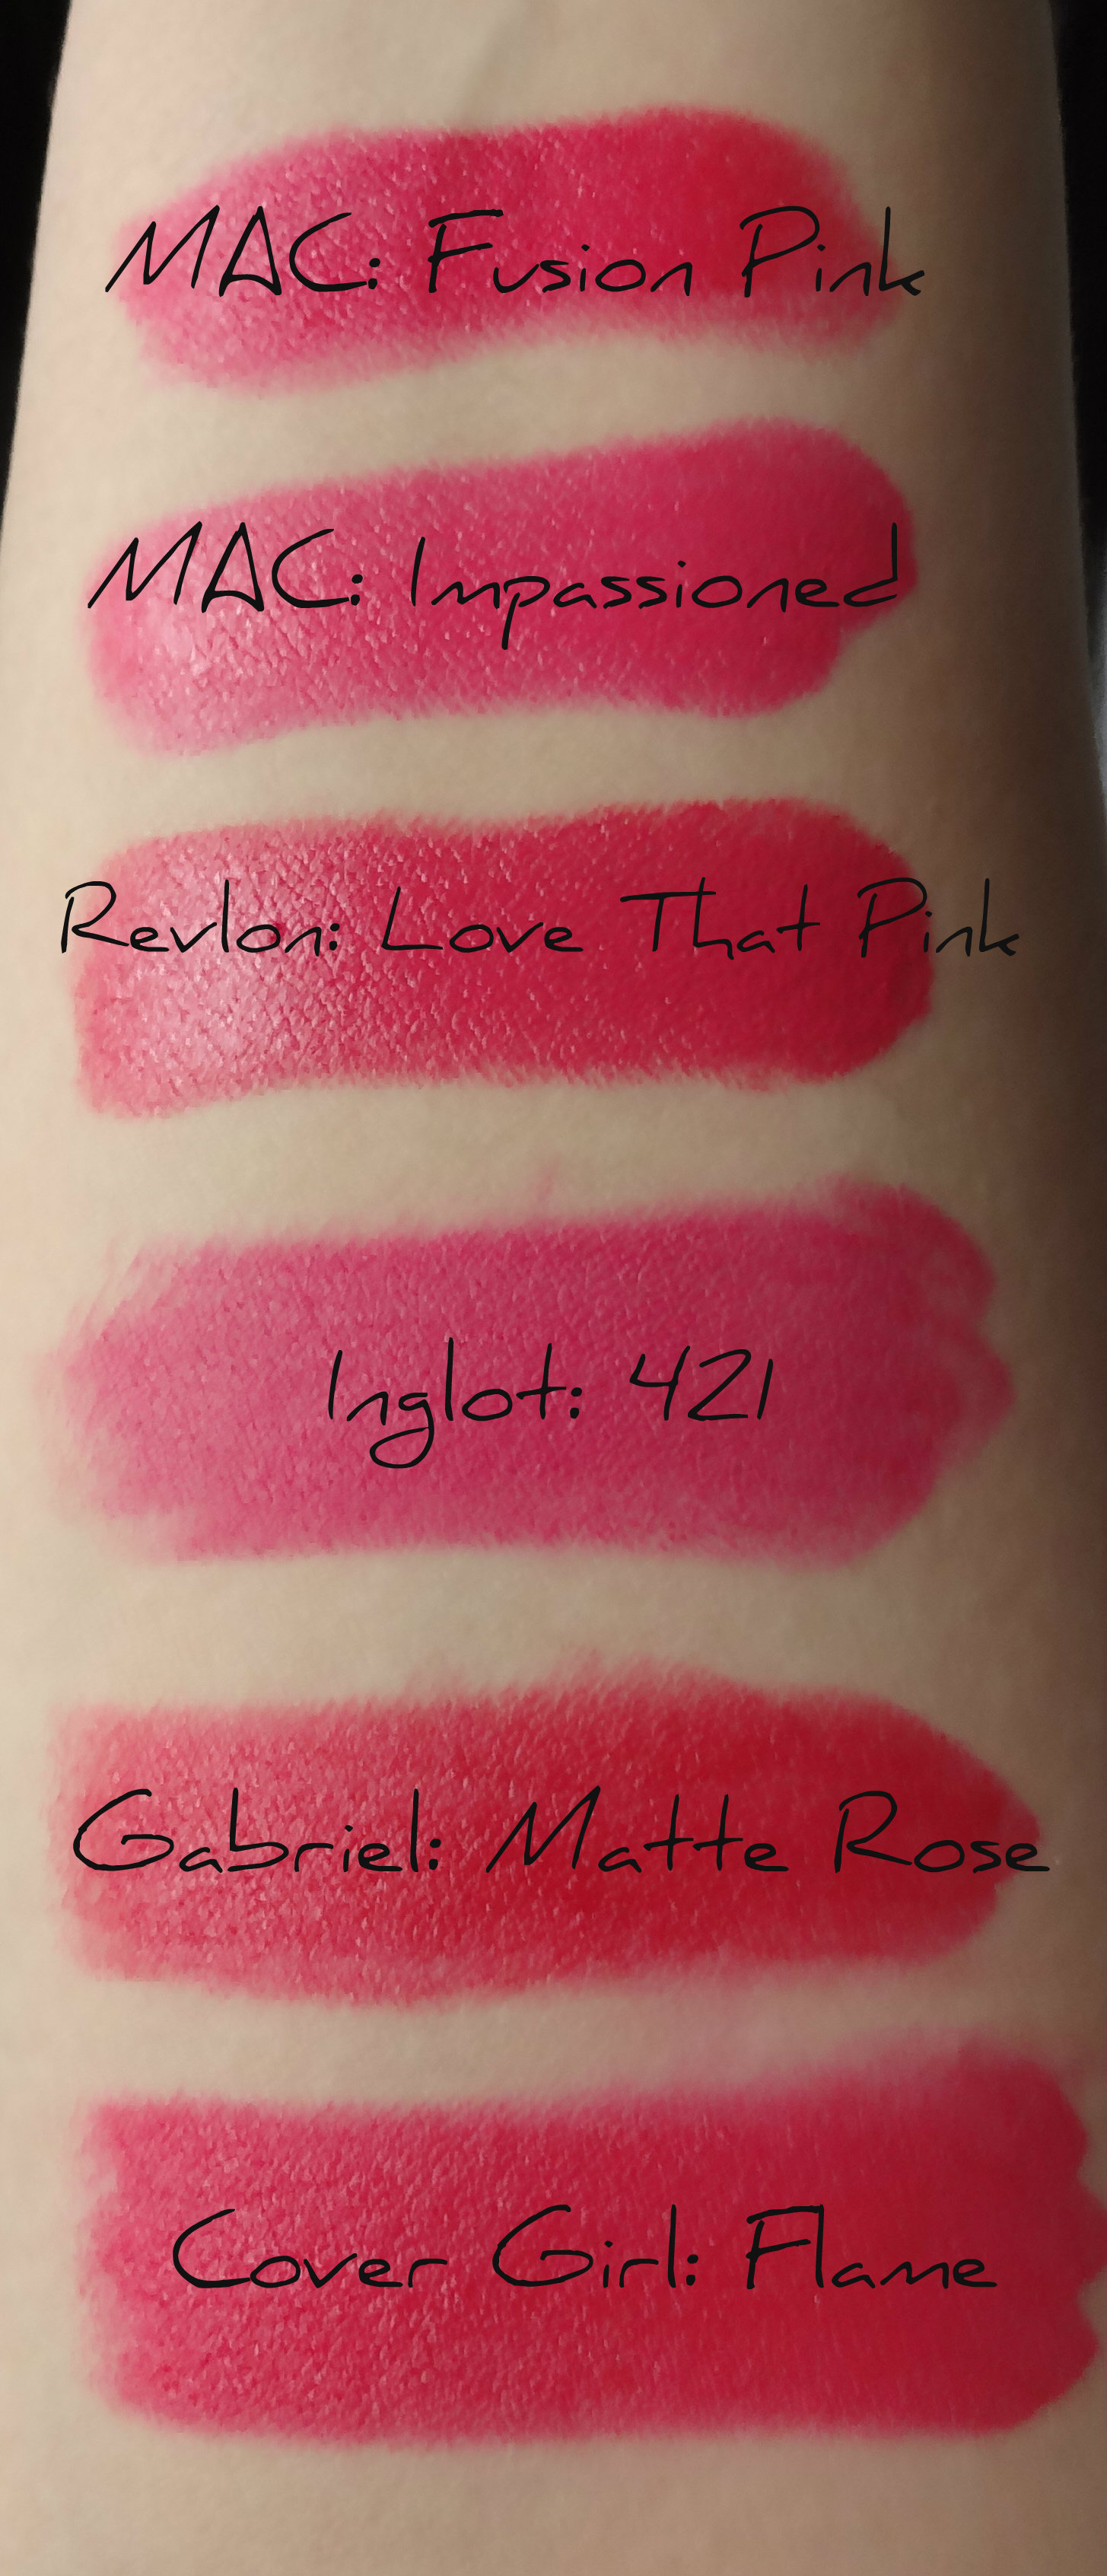 Rosy-Pink Lips: The Swatches.